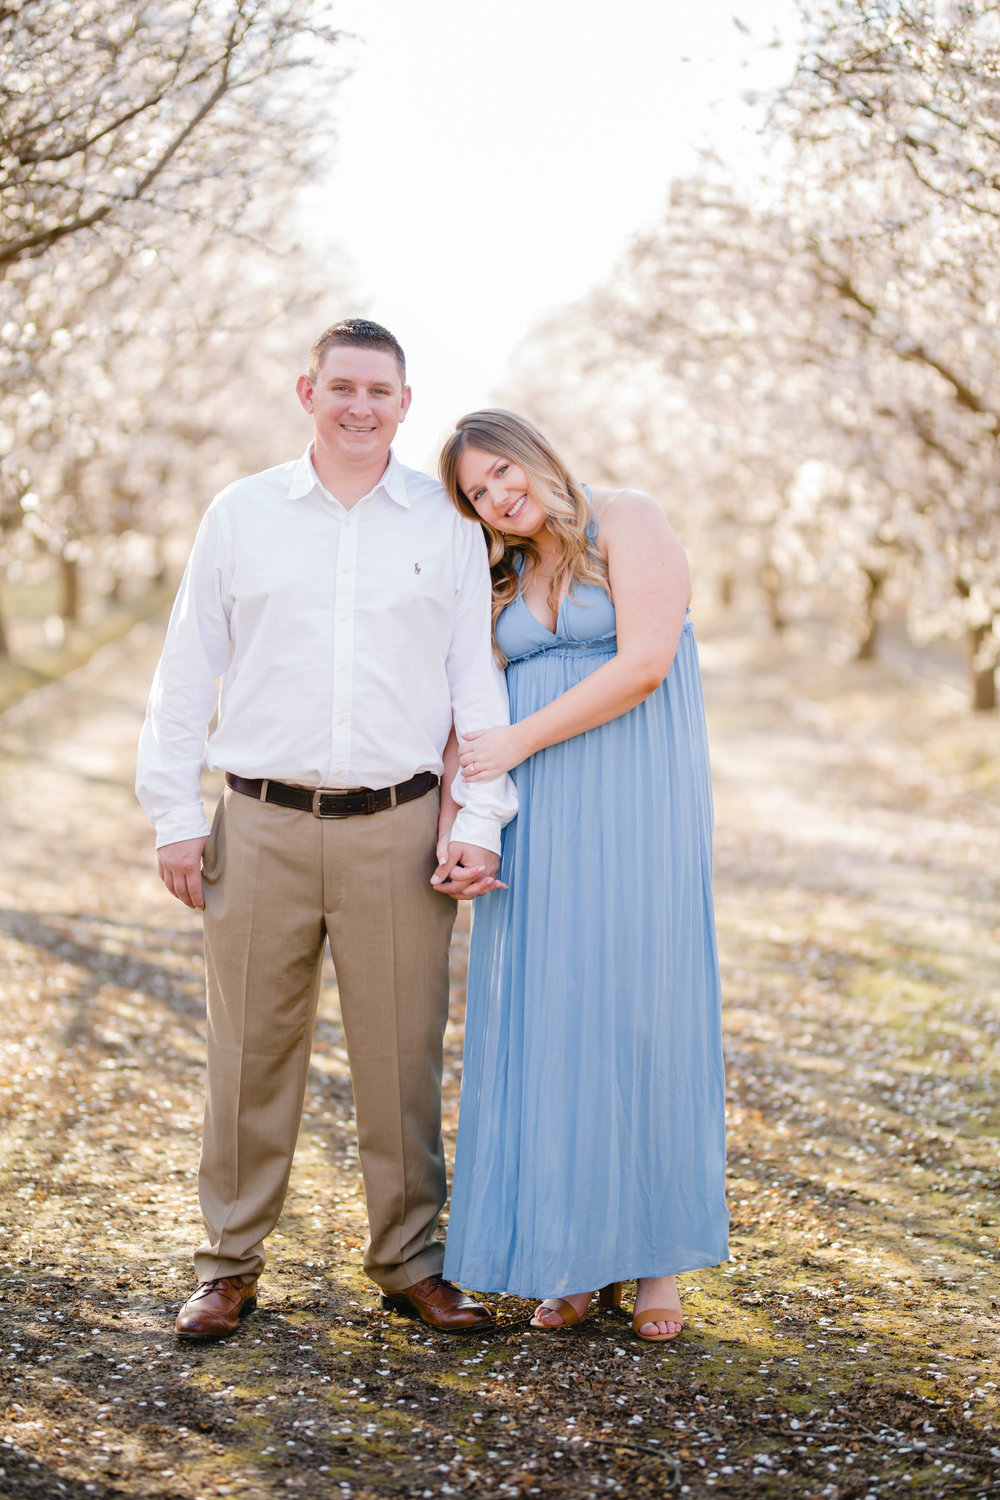 blue and white engagement photo ideas in almond blossoms